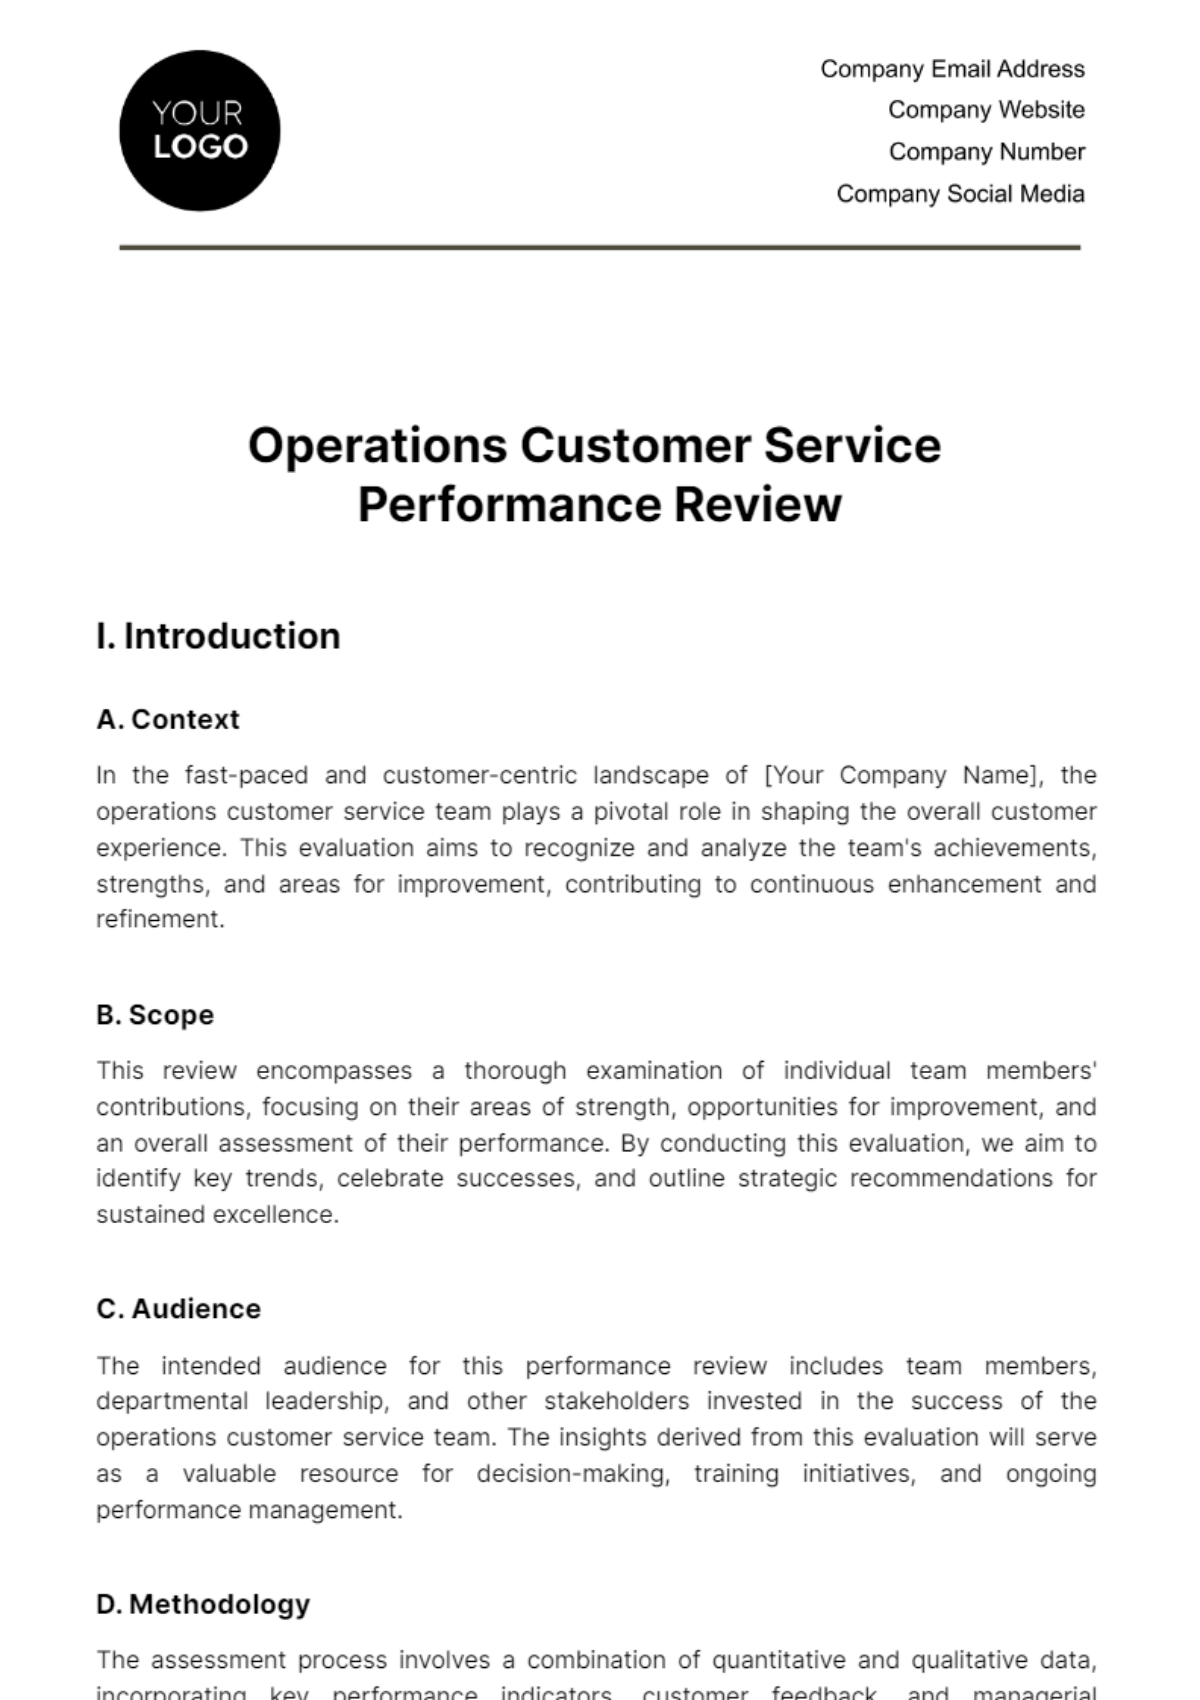 Free Operations Customer Service Performance Review Template